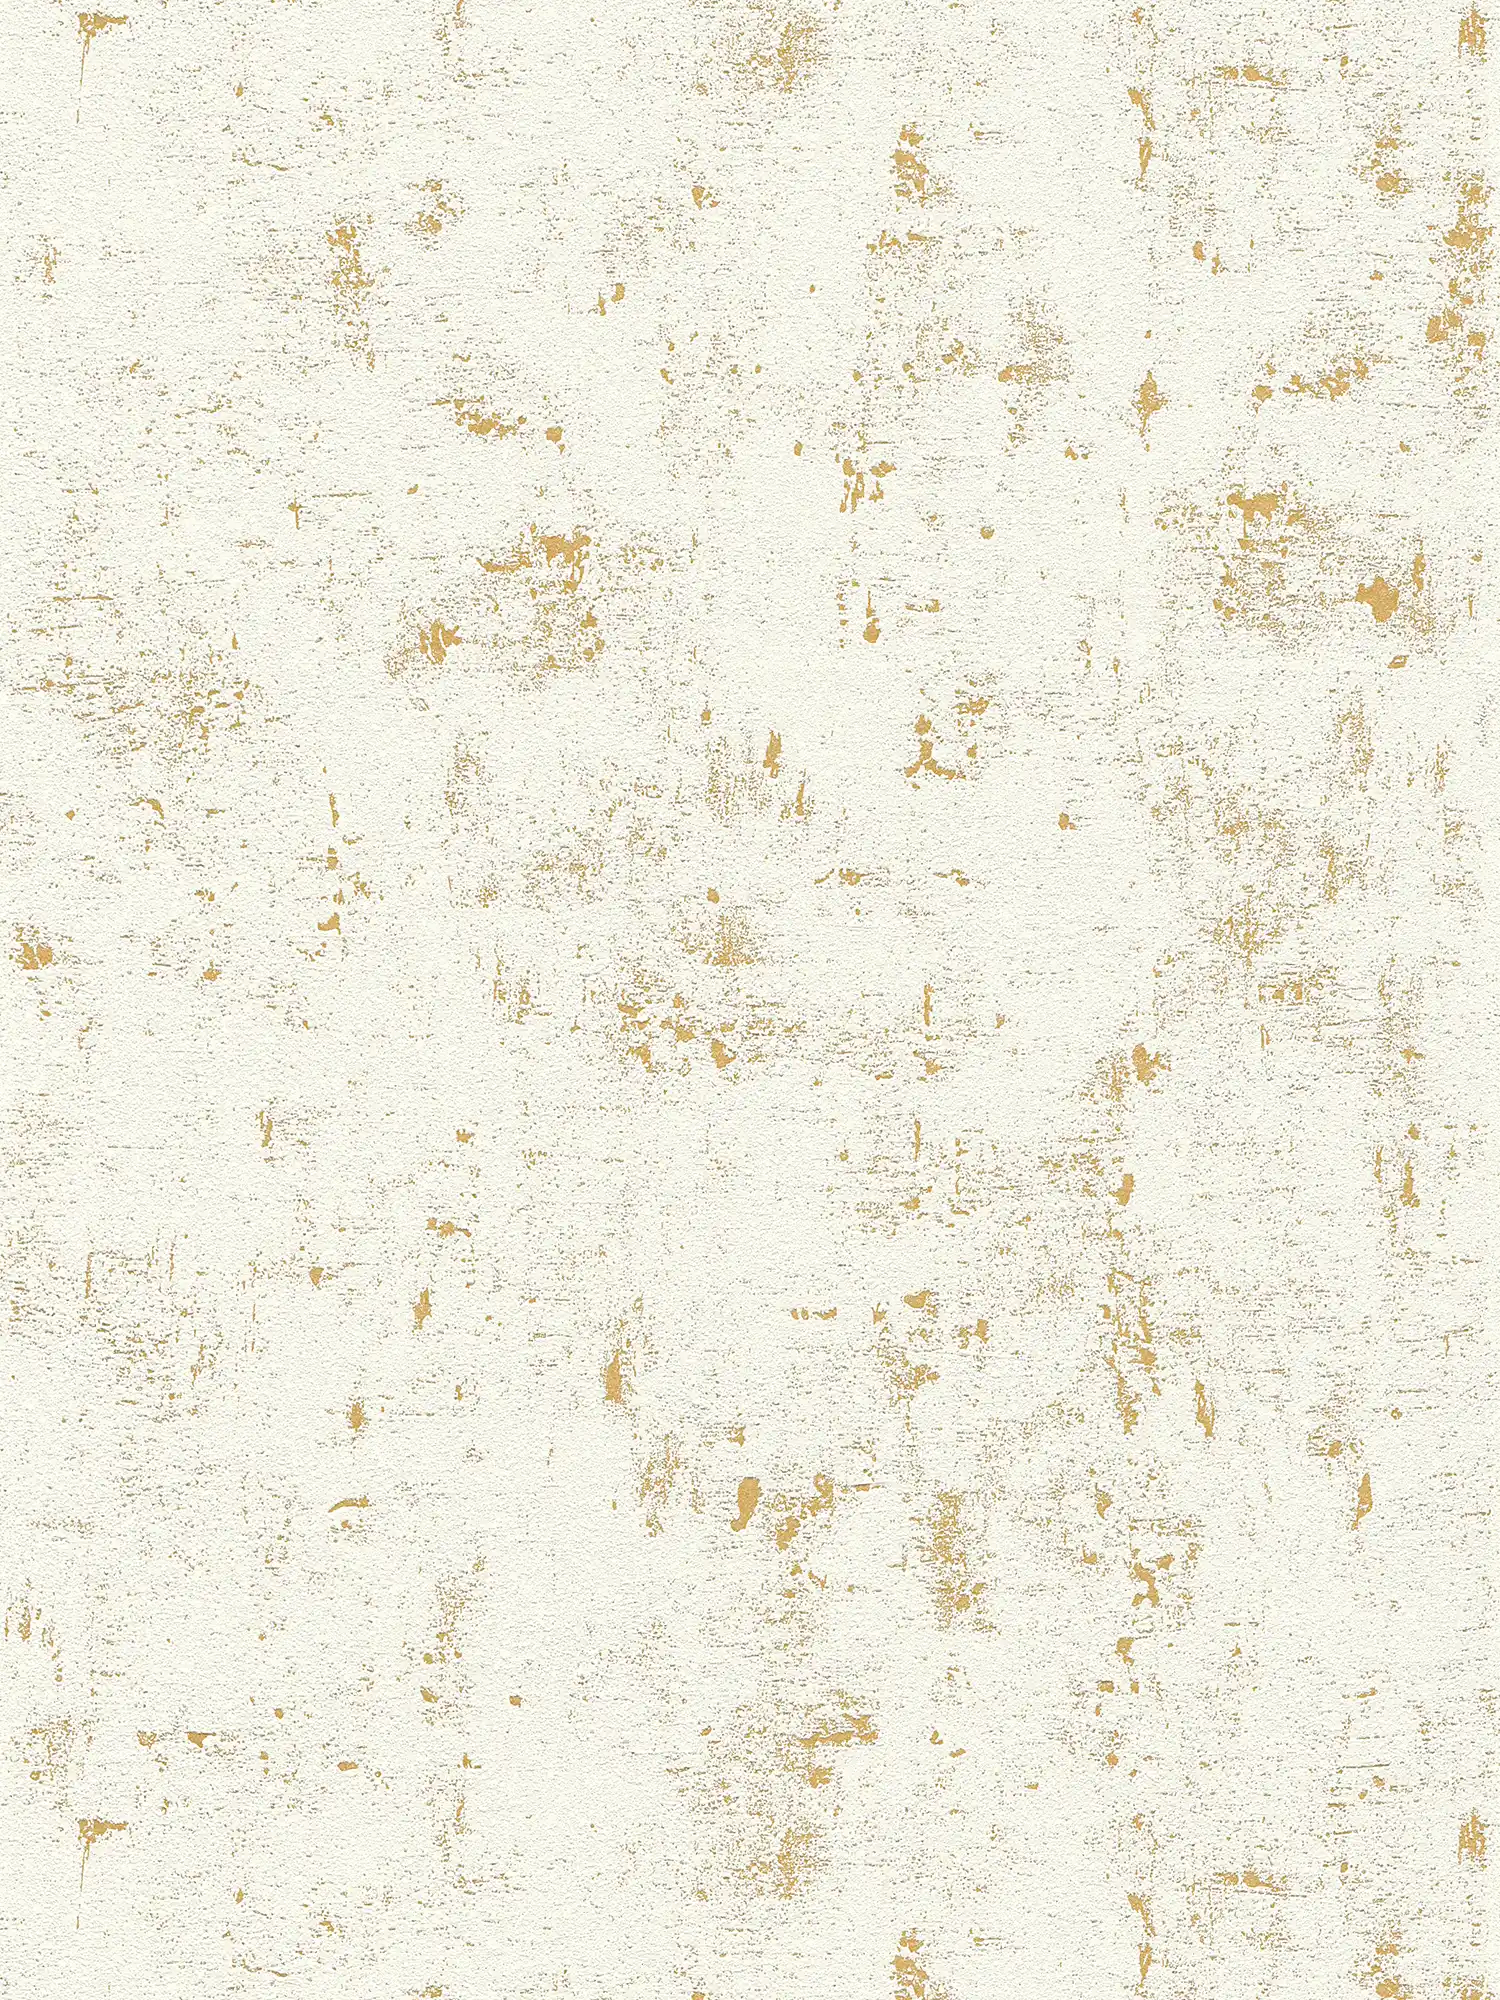 Used look wallpaper with metallic effect - cream, gold
